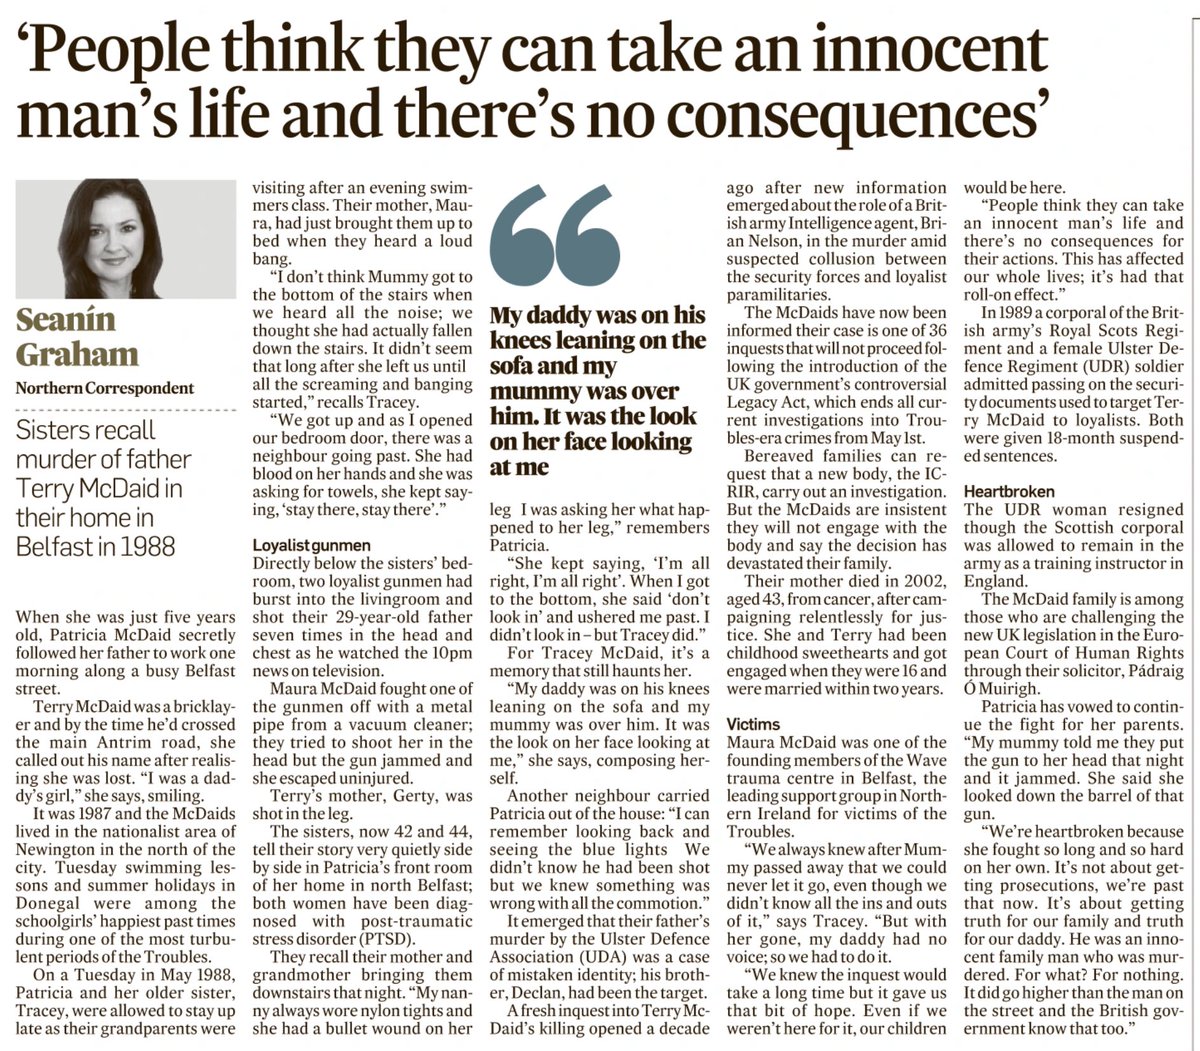 “In 1989 a corporal of the British army’s Royal Scots Regiment and a female Ulster Defence Regiment (UDR) soldier admitted passing on the security documents used to target Terry McDaid to loyalists. Both were given 18-month suspended sentences.”
~Seanín Graham, The Irish Times